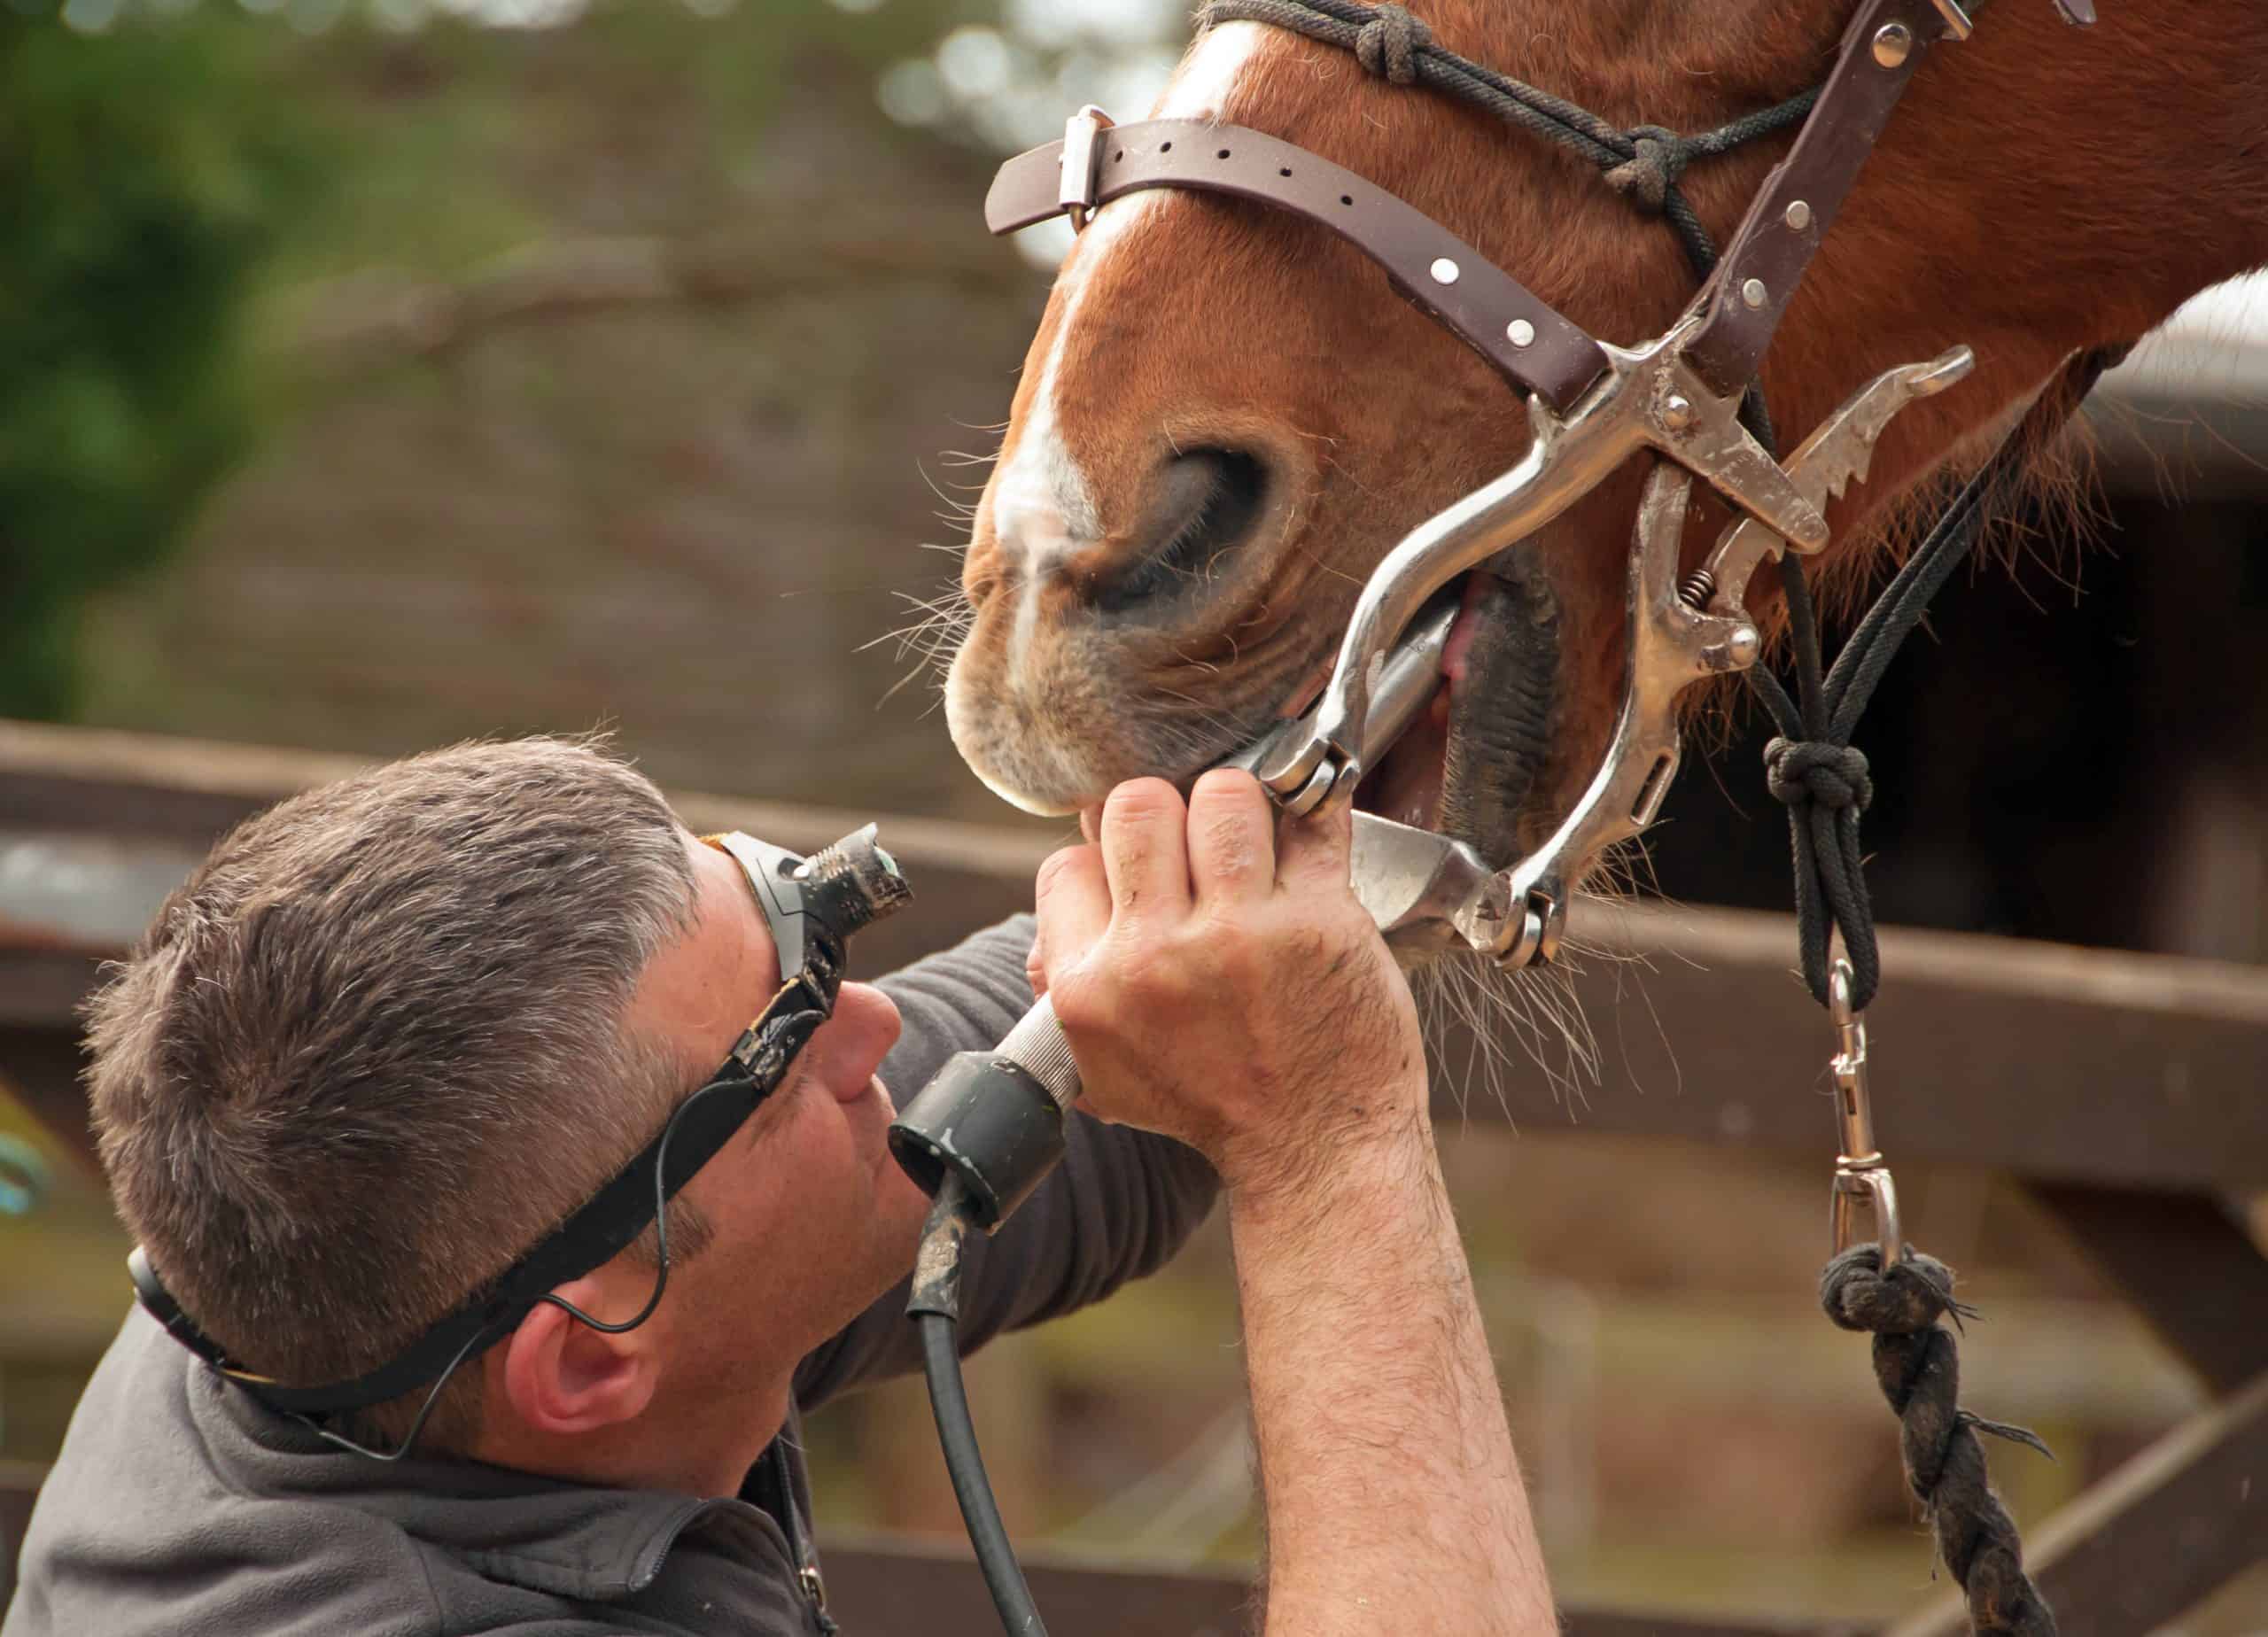 Dental treatment from an equine professional